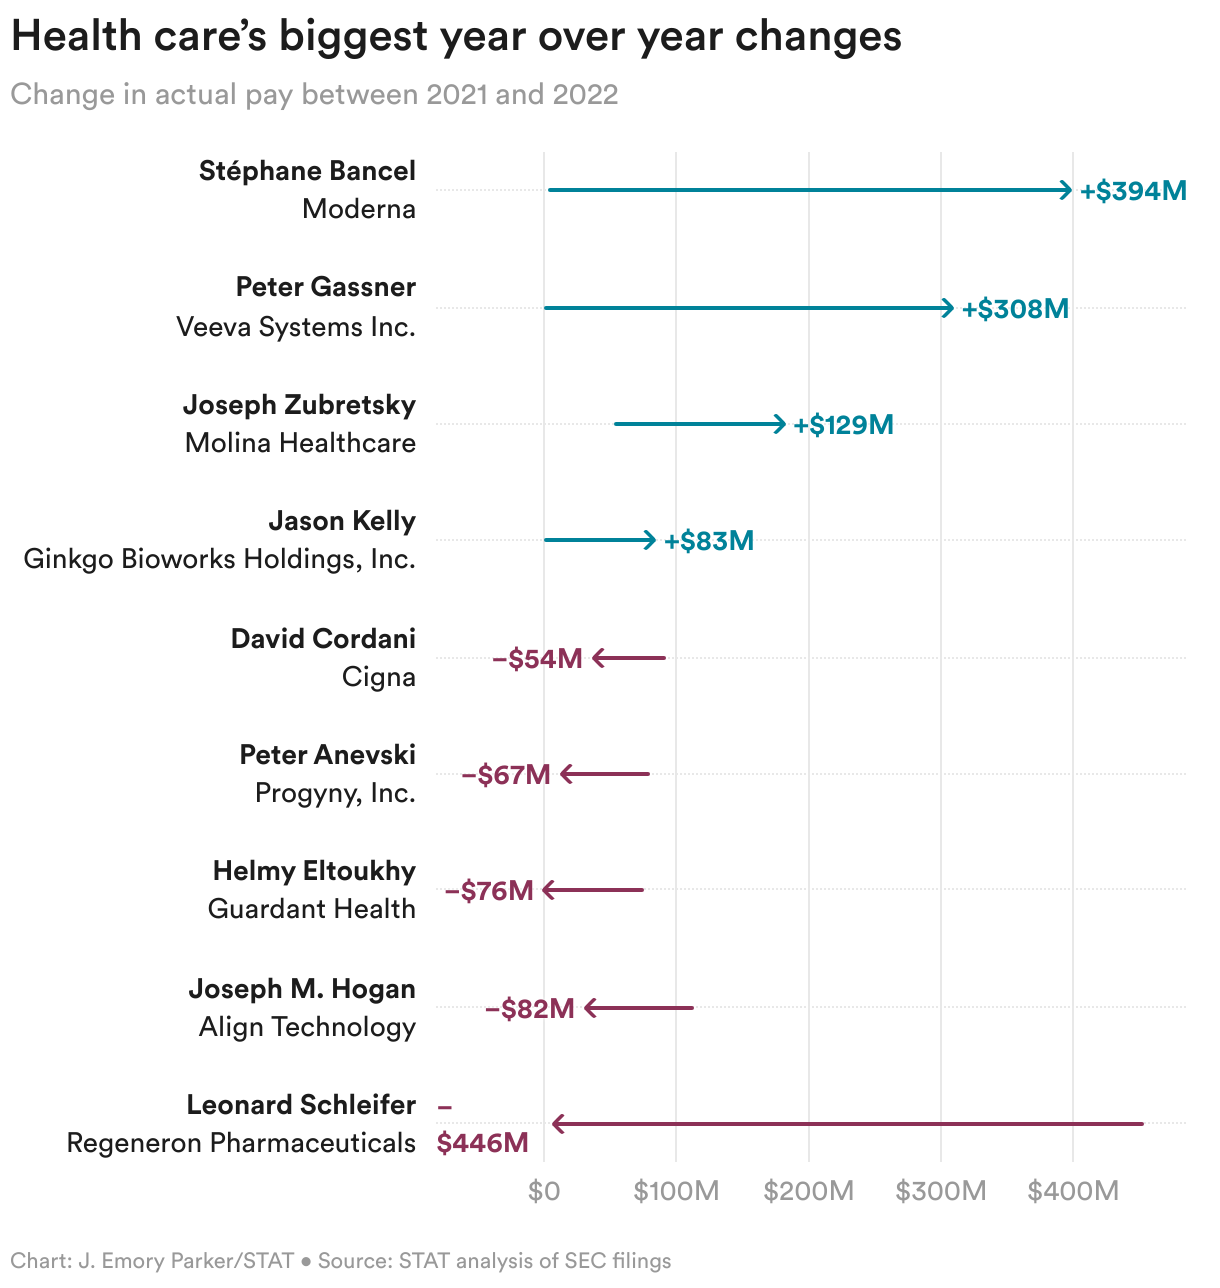 A chart comparing CEO pay between 2021 and 2022. Moderna's Stephane Bancel had the largest increase at 394 million dollars while Regeneron's Leonard Schleifer had the largest decrease at 446 million dollars.